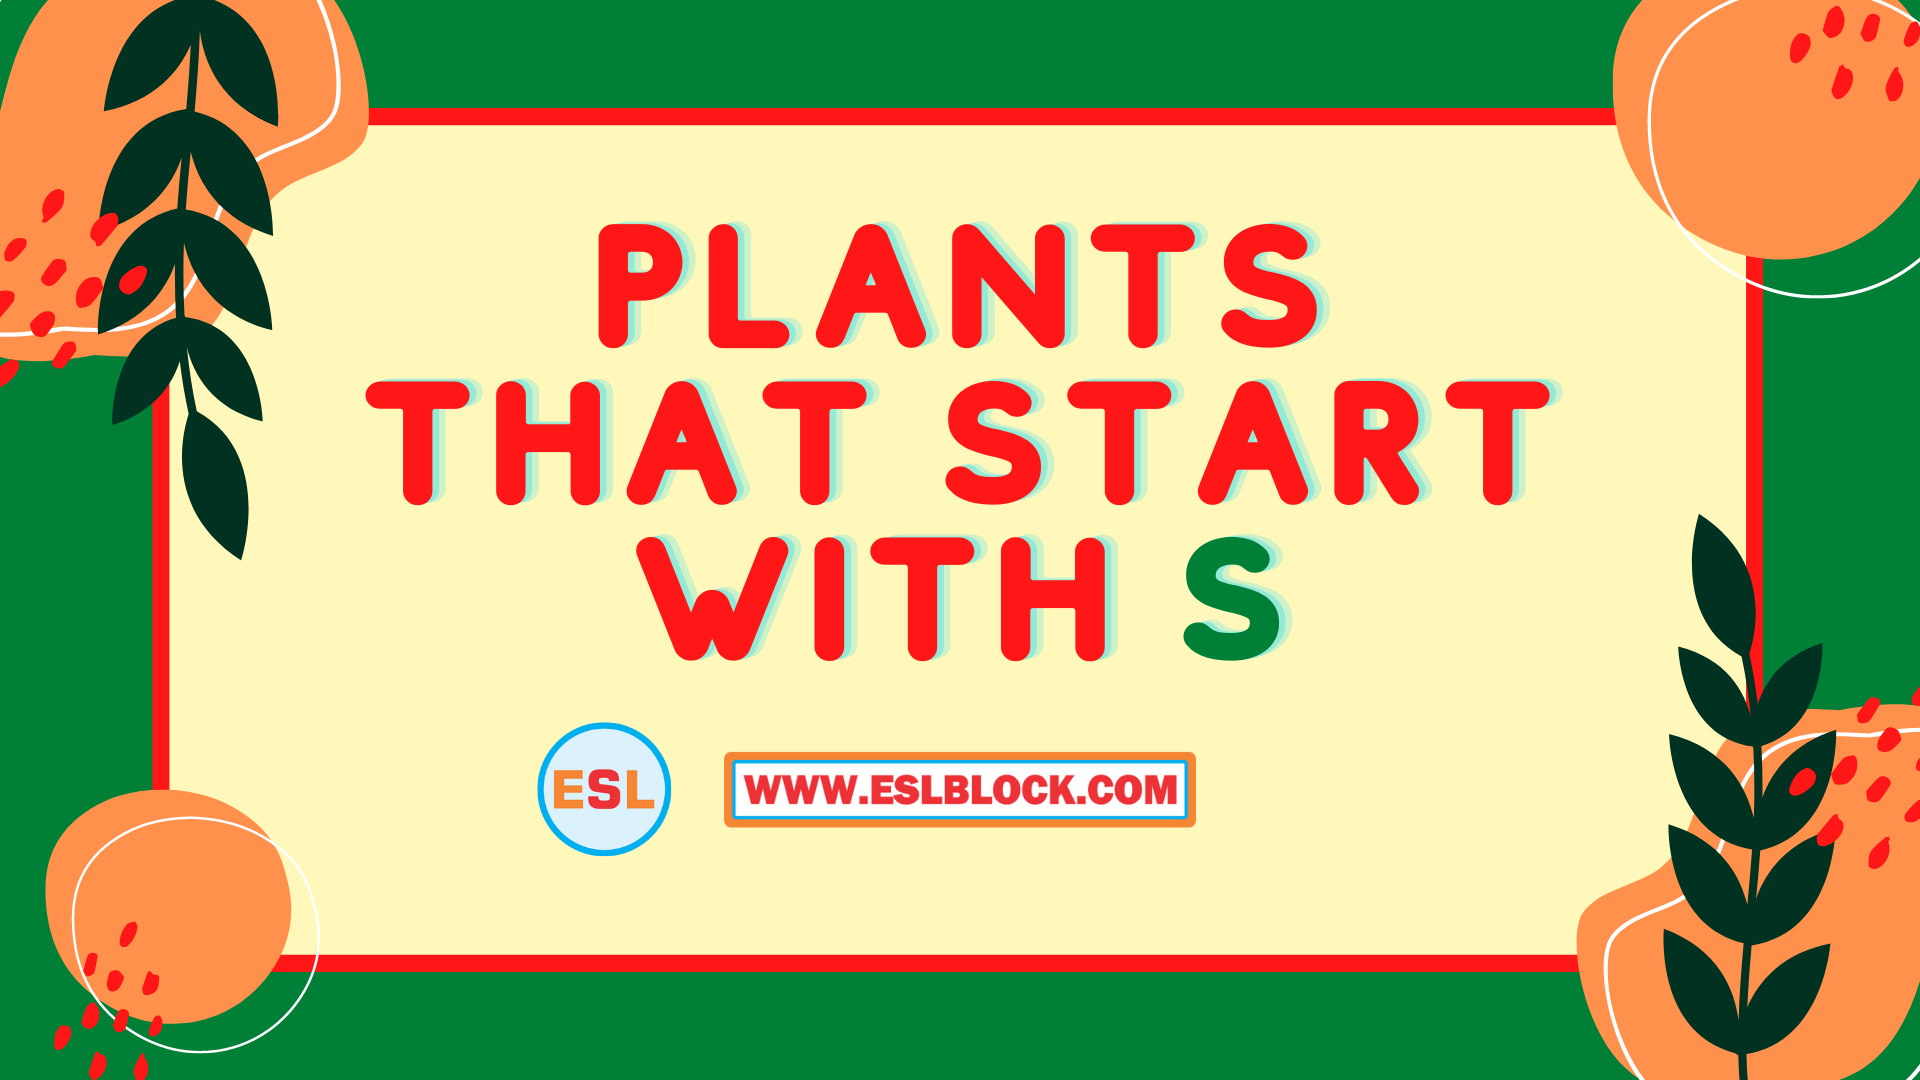 4 Letter Plants, 5 Letter Plants Starting With S, English, English Grammar, English Vocabulary, English Words, List of Plants That Start With S, Plants List, Plants Names, Plants That Start With S, S Plants, S Plants in English, S Plants Names, Vocabulary, Words That Start With S